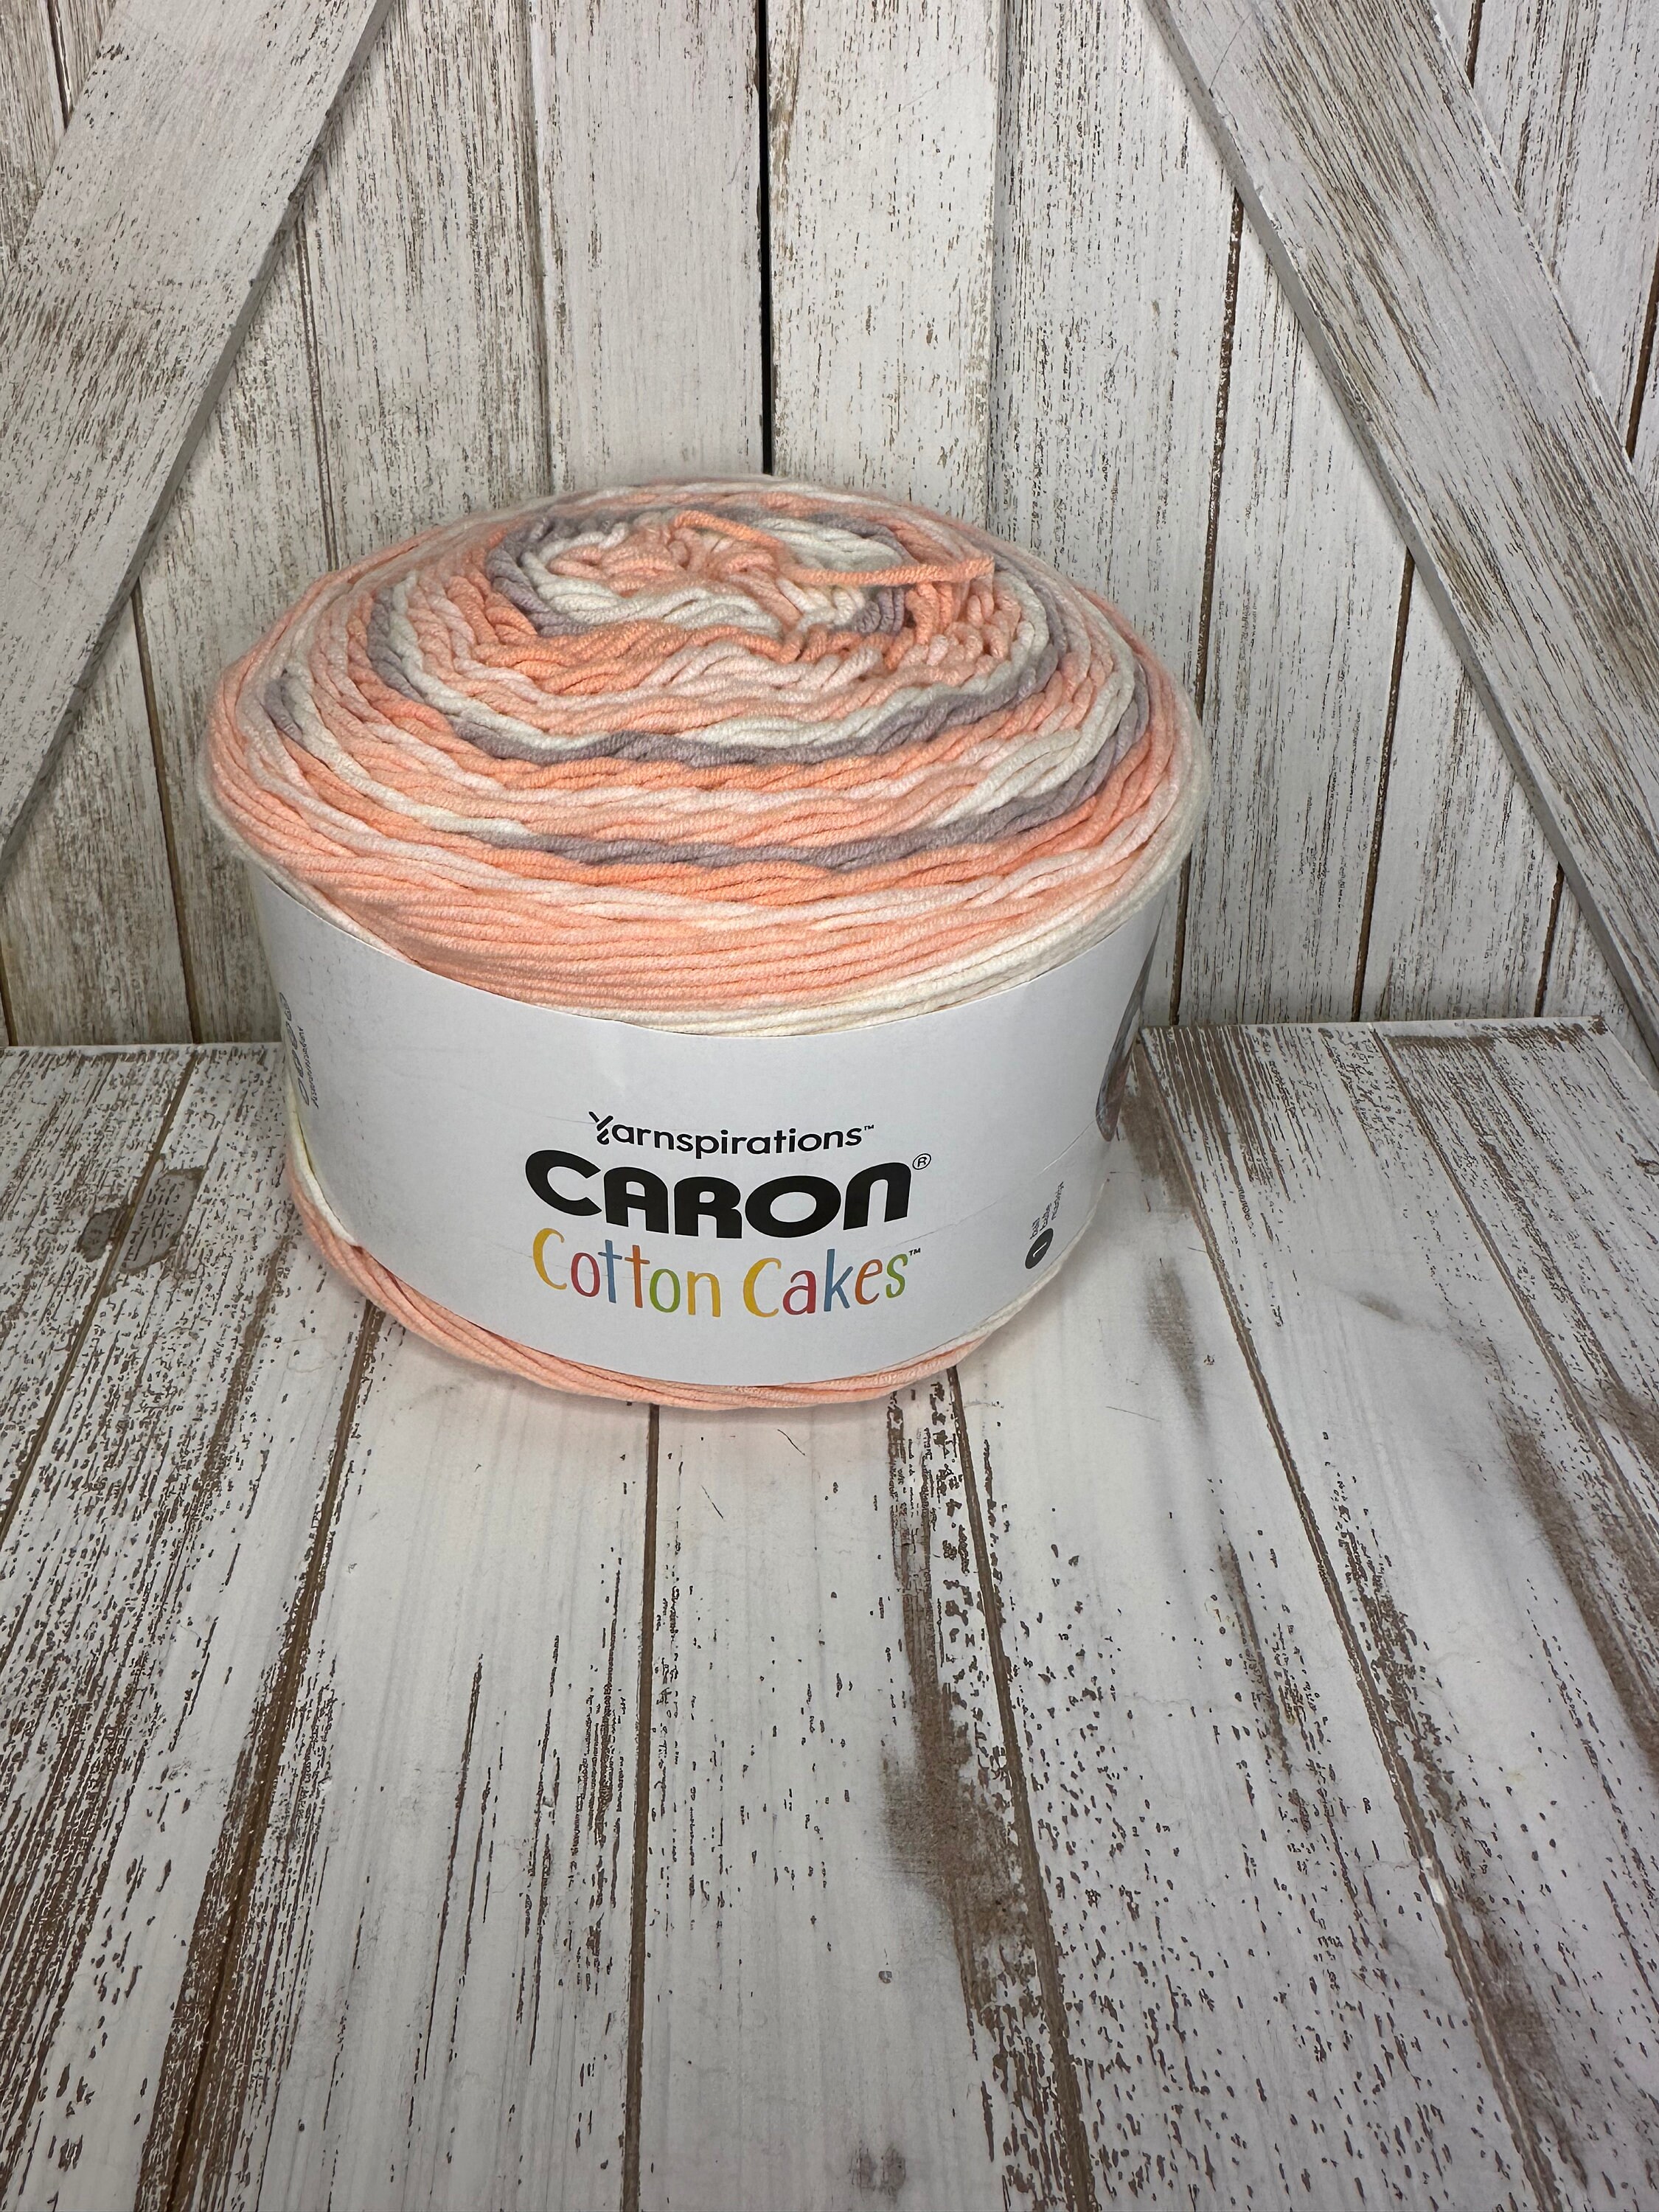  Caron Cotton Cakes - Driftwood : Arts, Crafts & Sewing